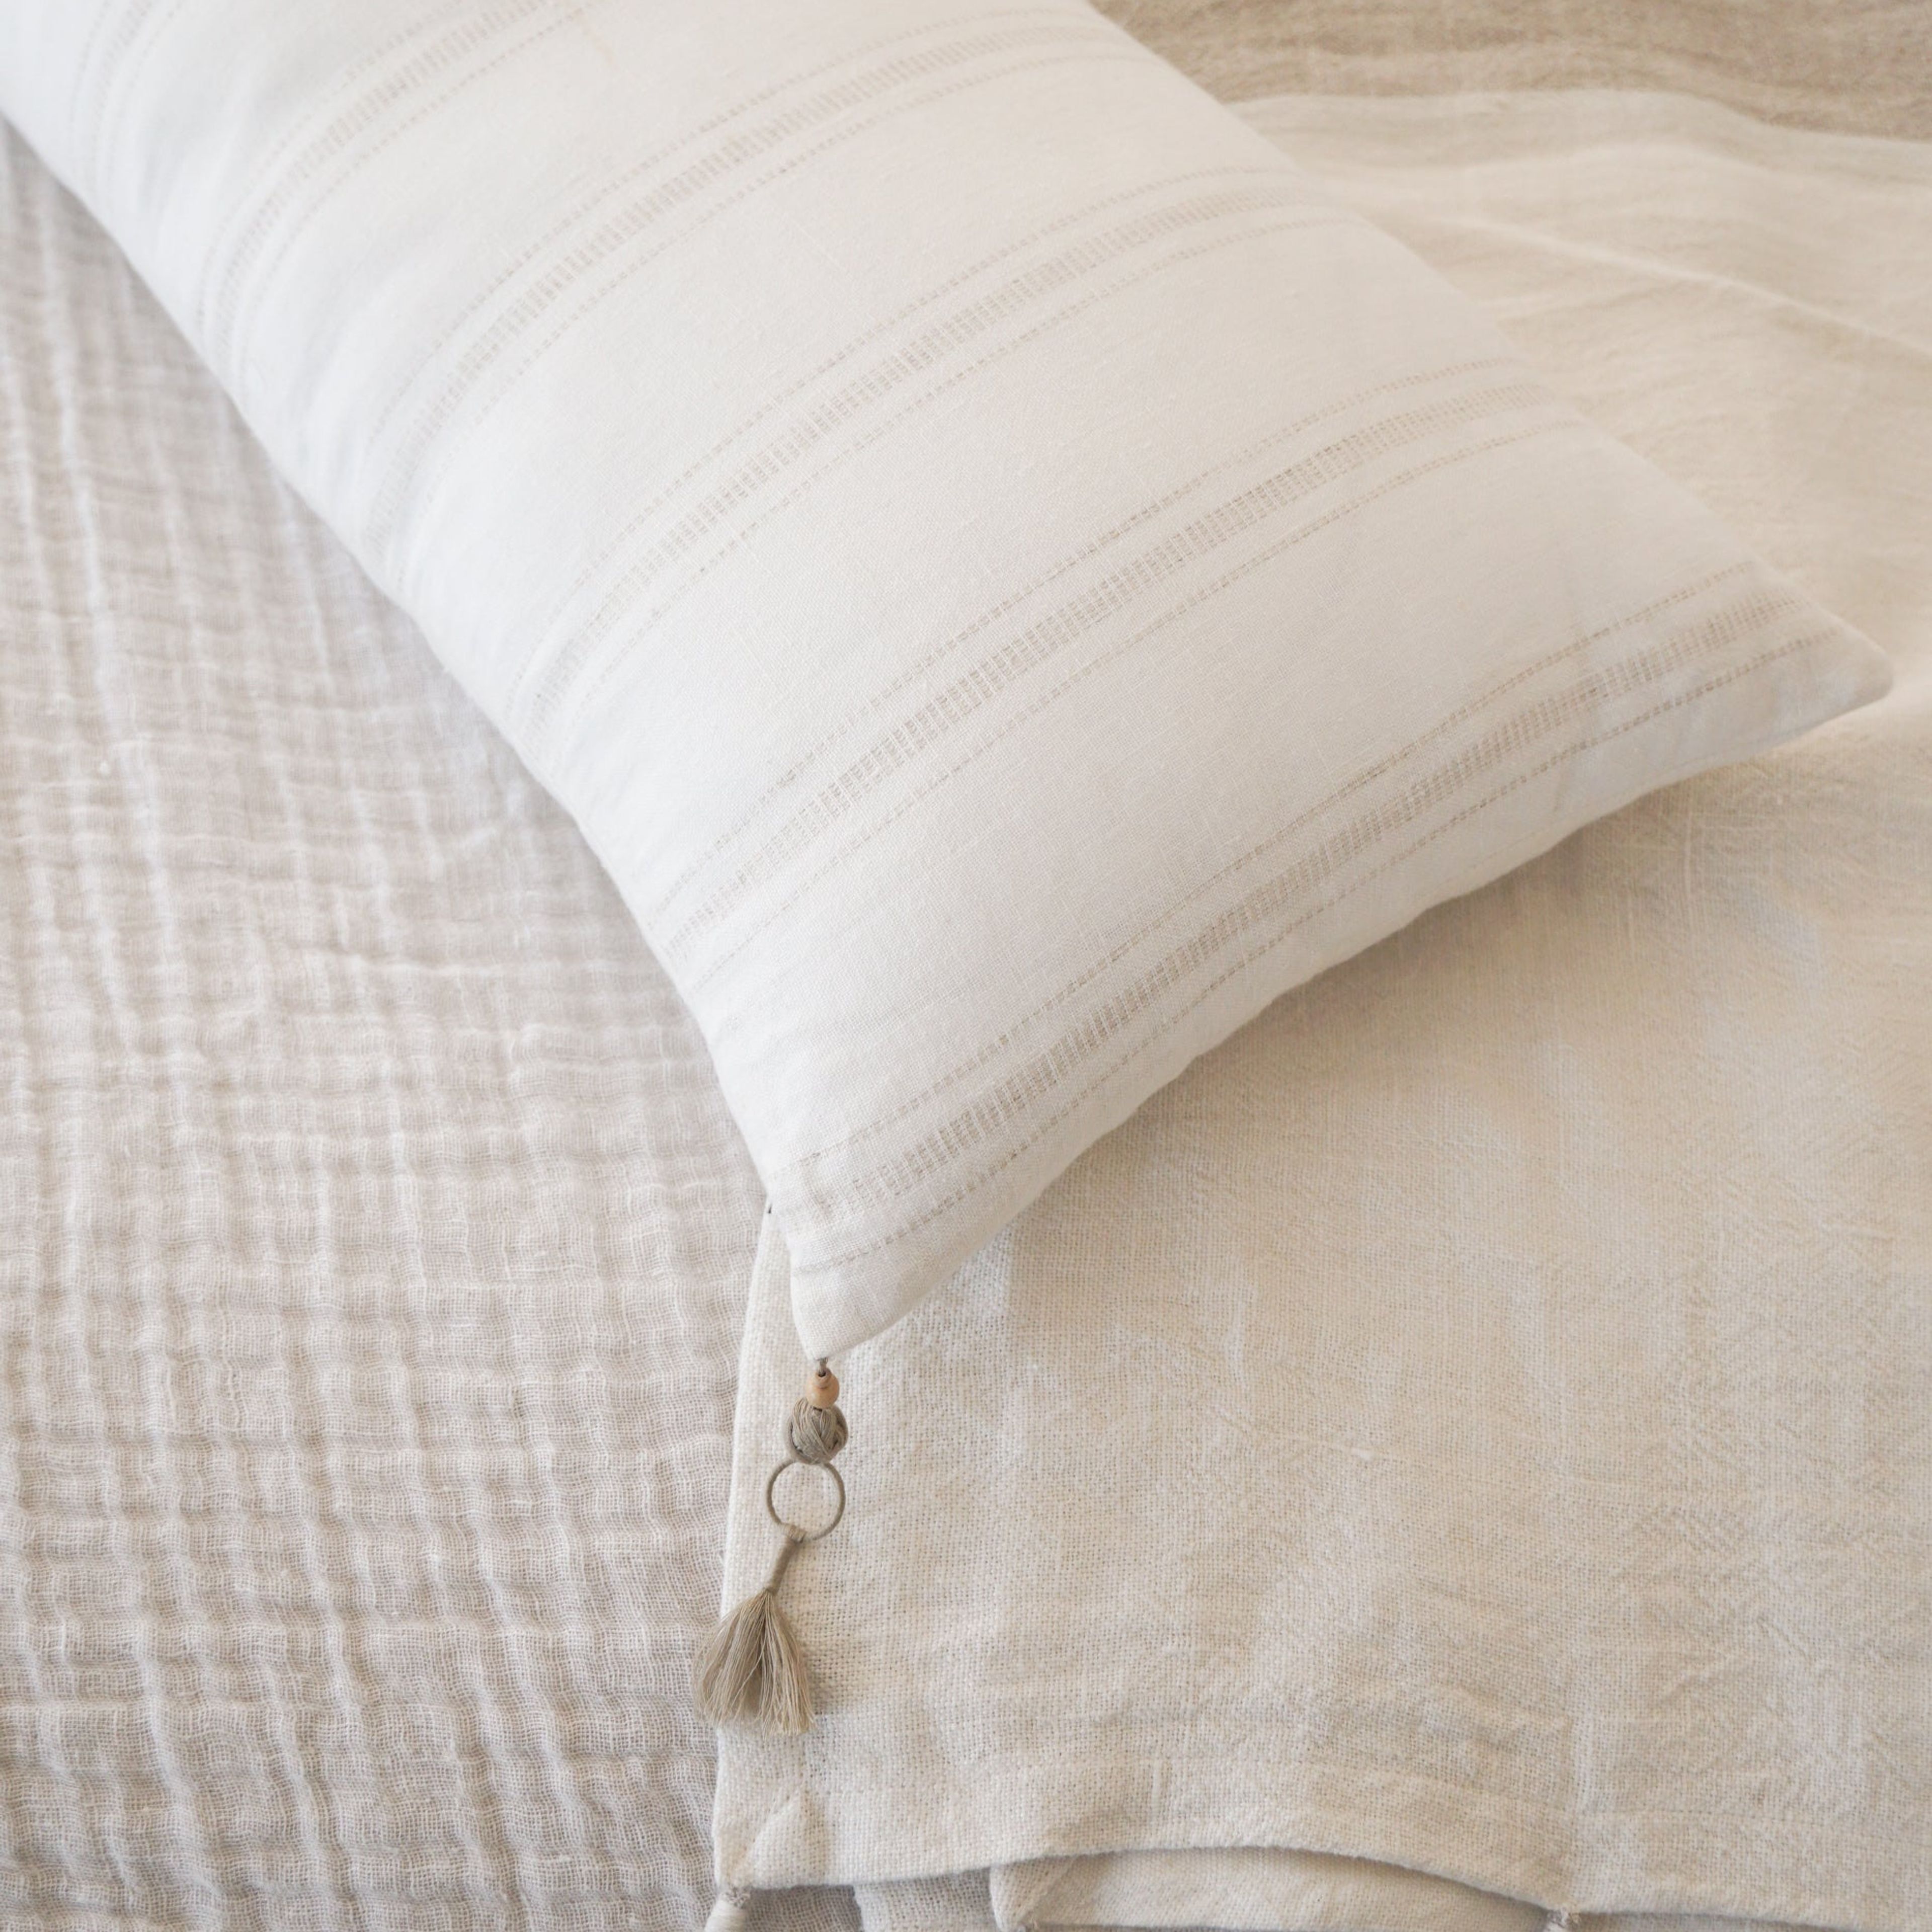 White with Beige Stripes Linen Pillow 13x30